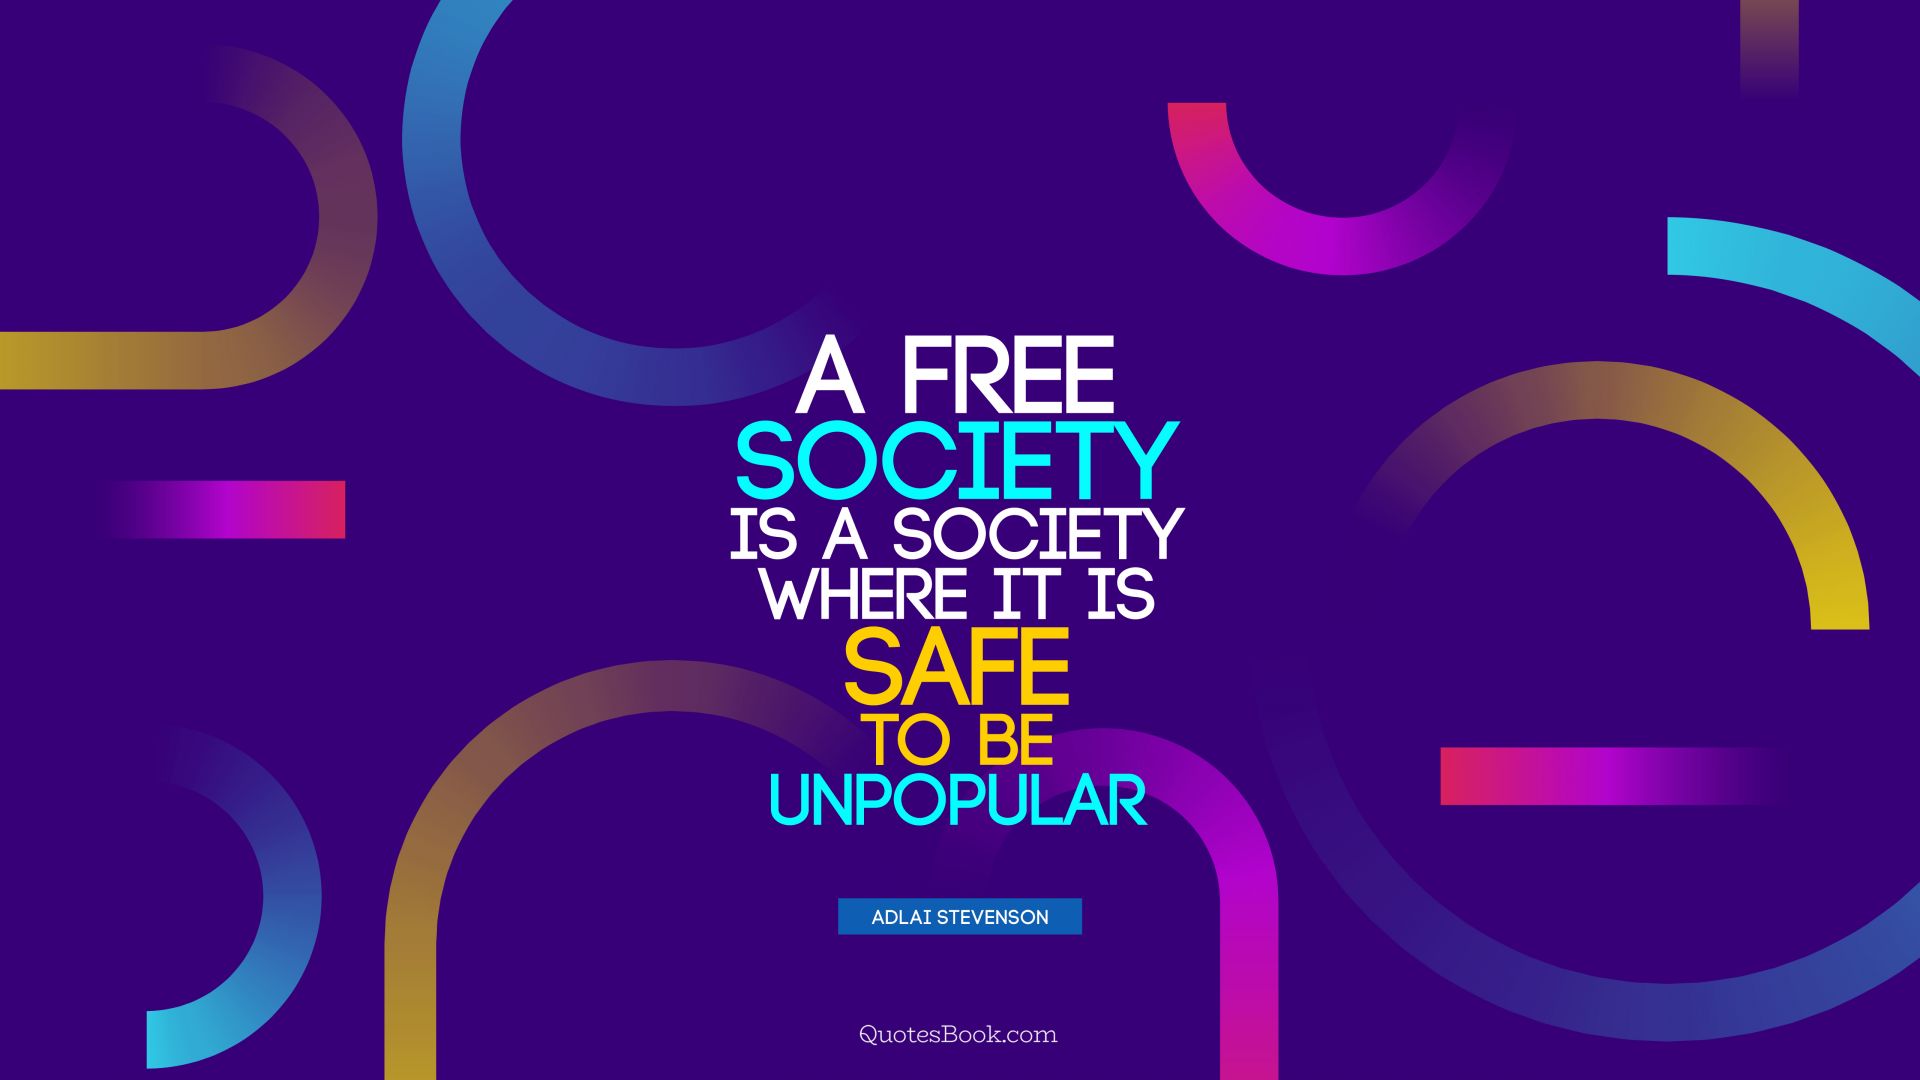 A free society is a society where it is safe to be unpopular. - Quote by Adlai Stevenson